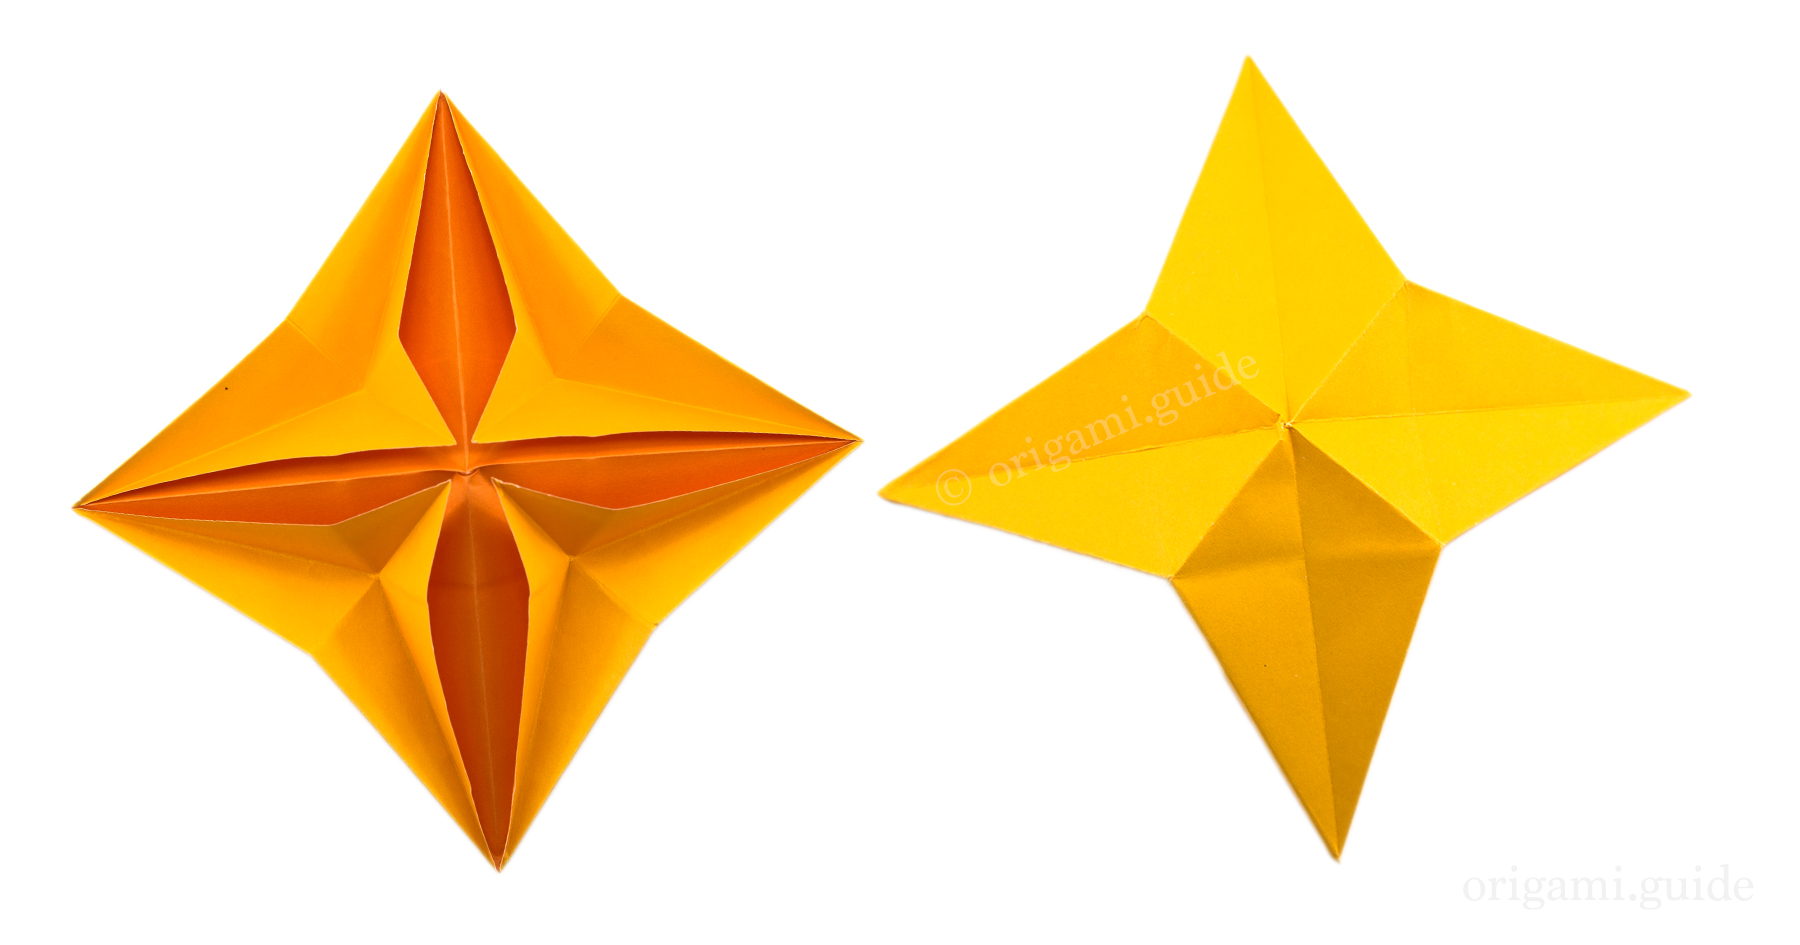 5 POINTED ORIGAMI STAR , HOW TO MAKE - Easy to Follow Tutorial in